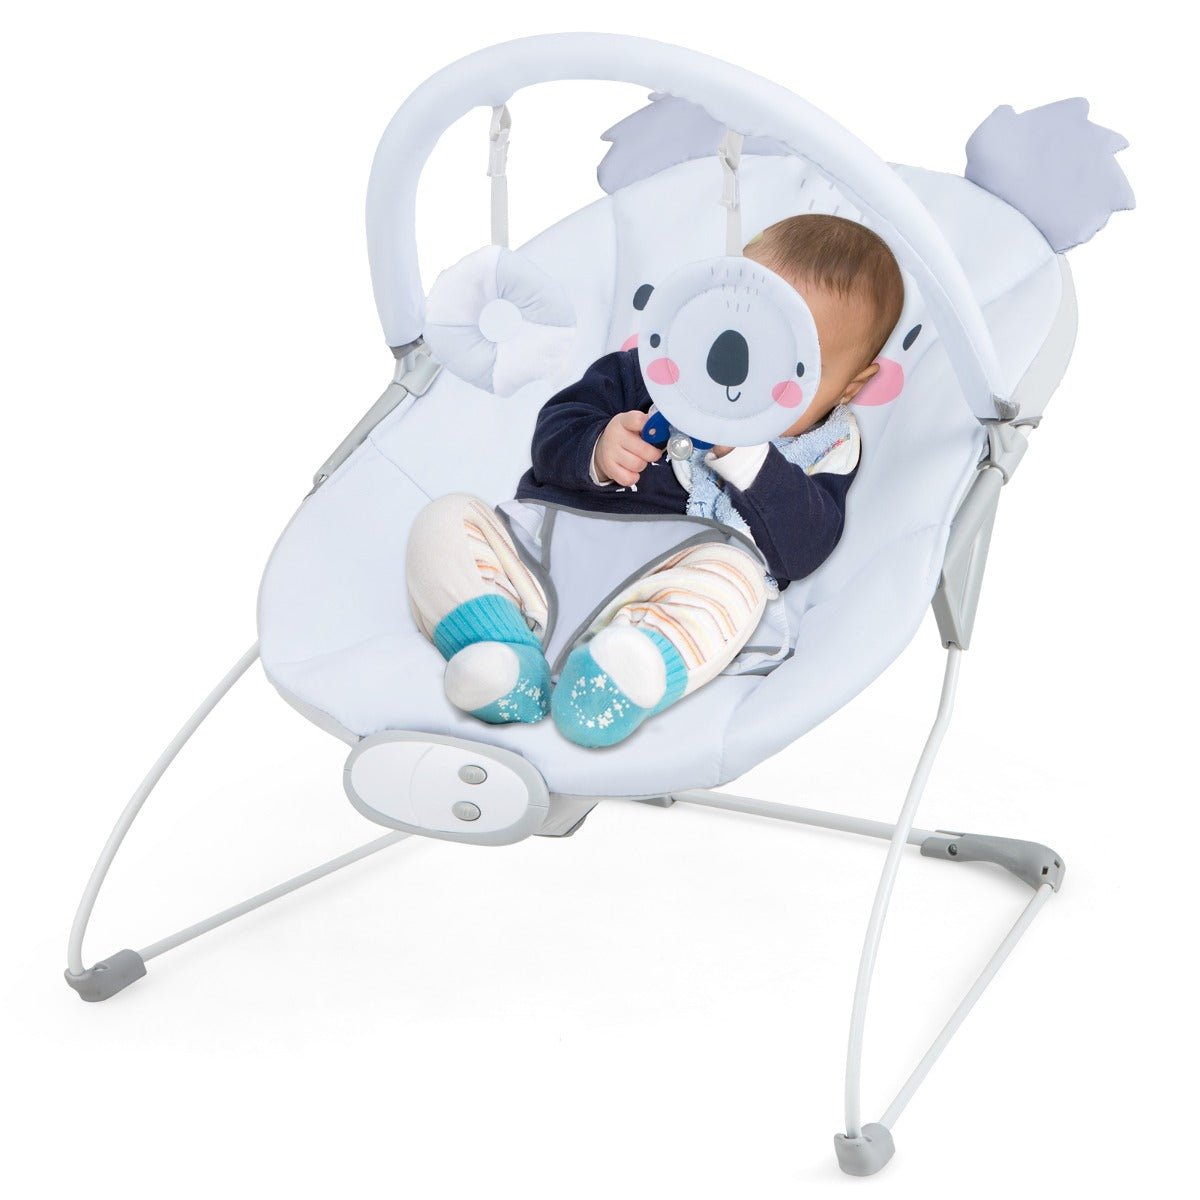 Baby Infant Rocker Seat with Detachable Toy Bar